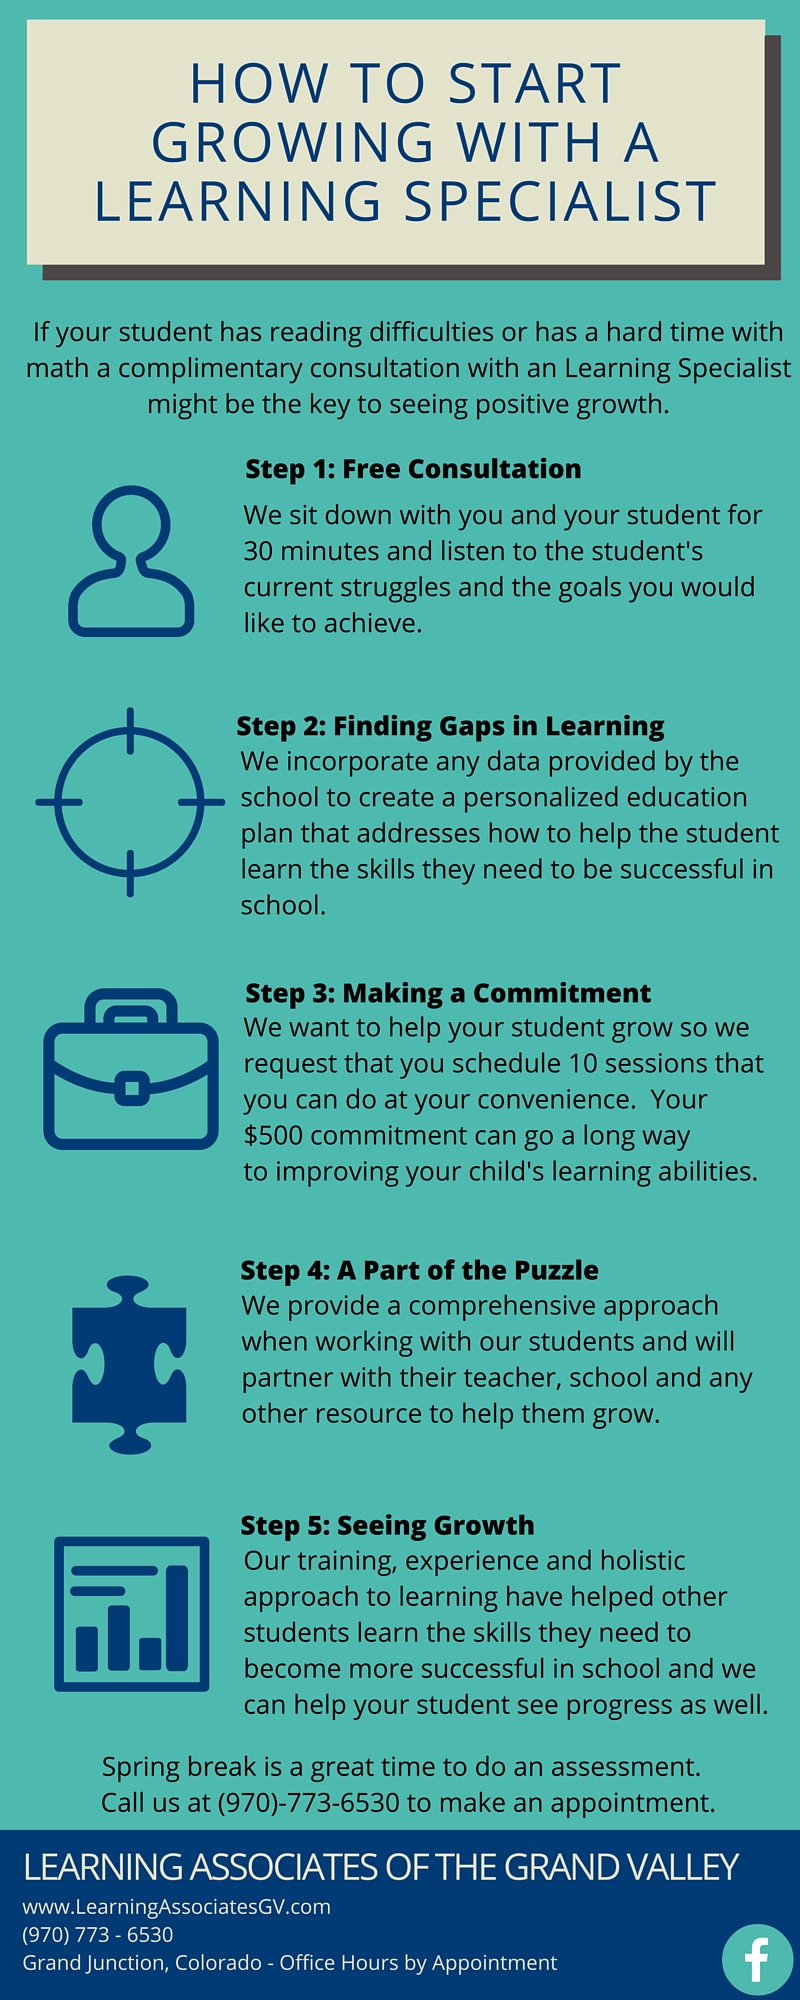 How to start growing with a learning specialist.